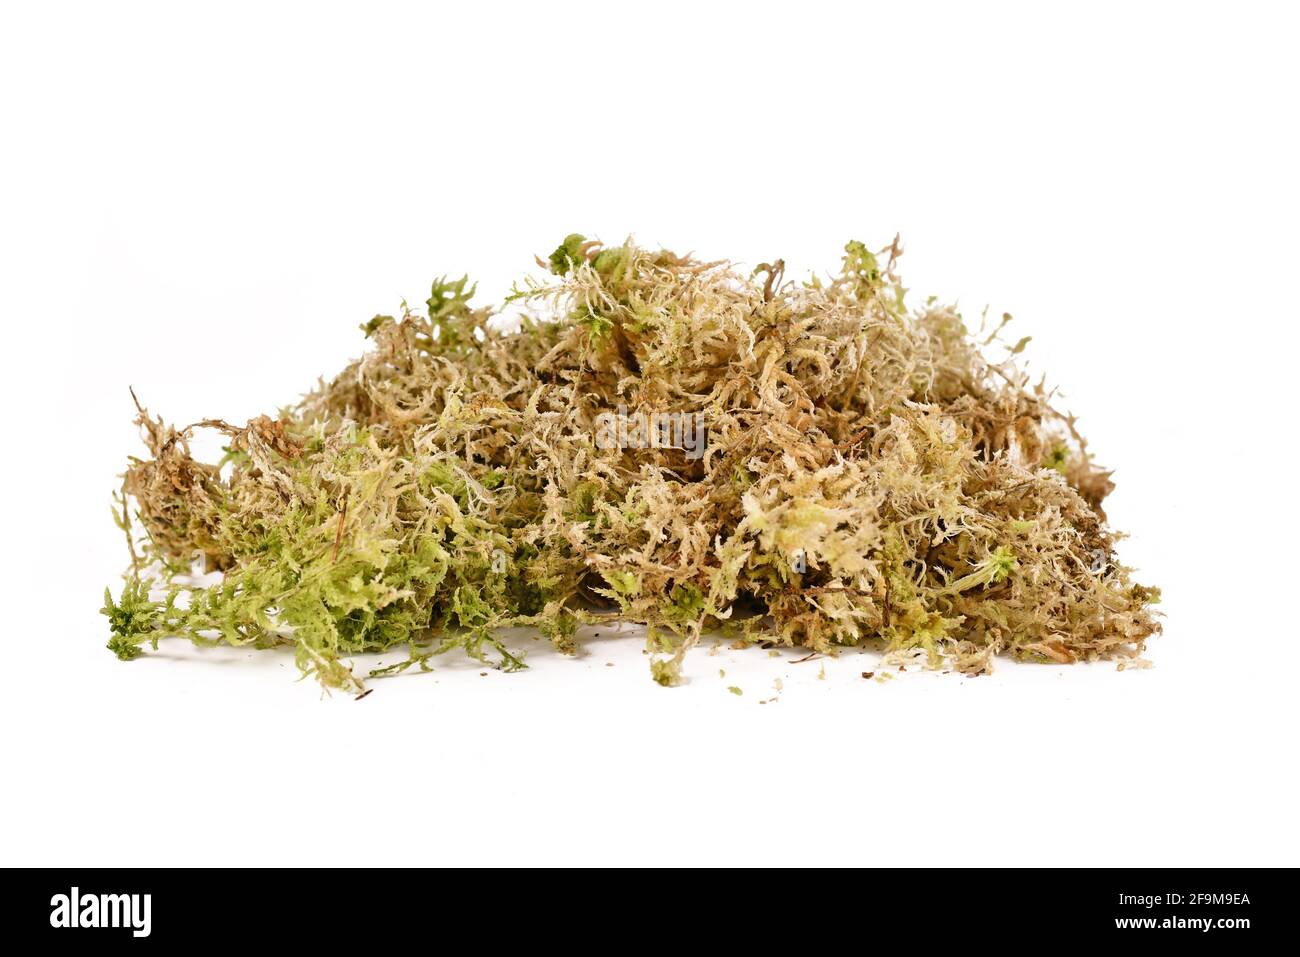 Everything you need to know to about sphagnum moss propagation